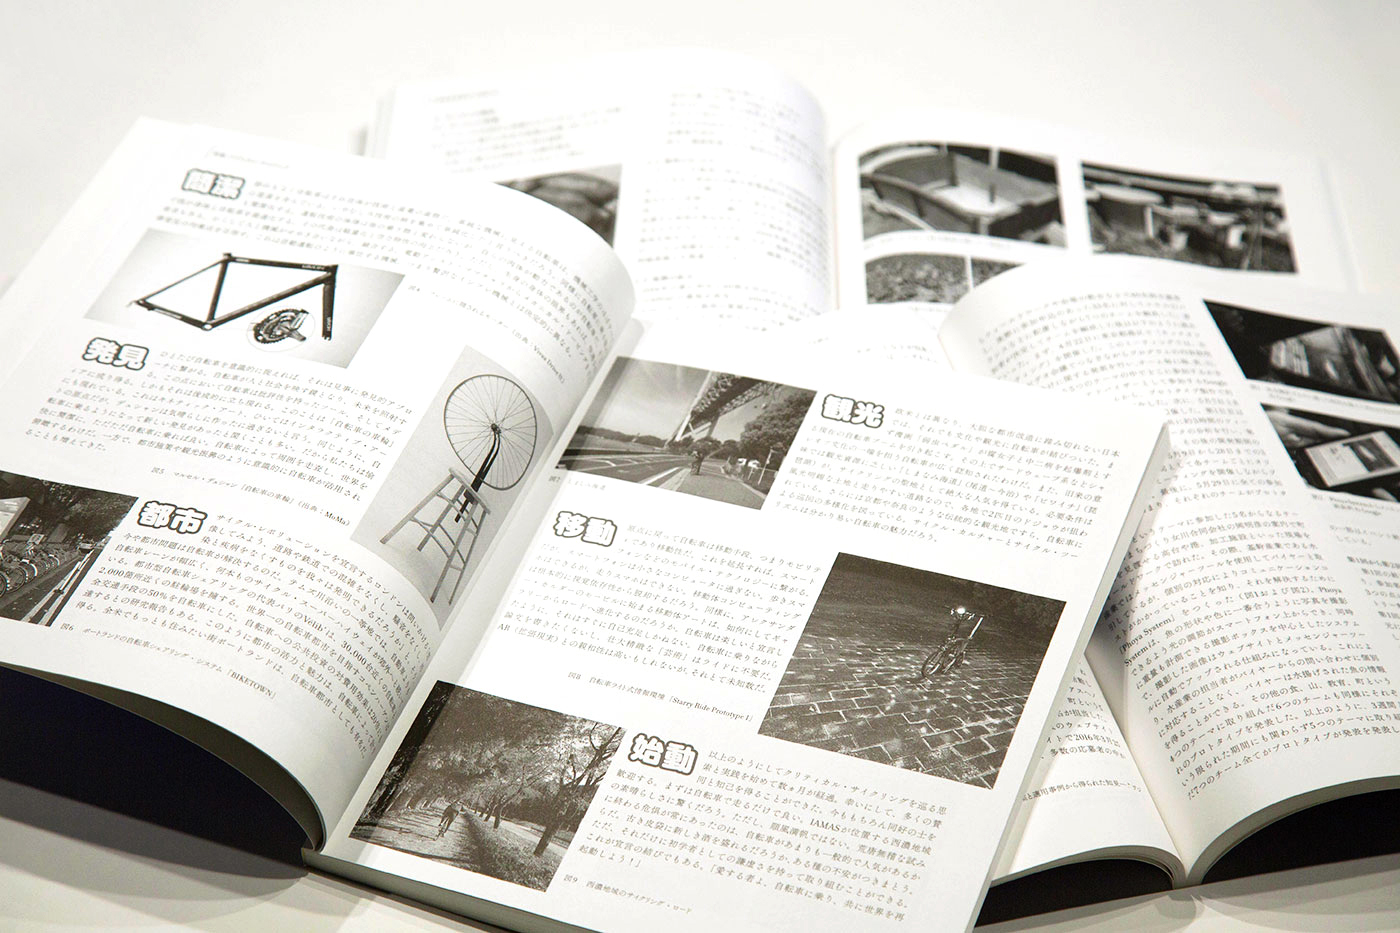 Journal of Institute of Advanced Media Arts and Sciences, Vol. 8`